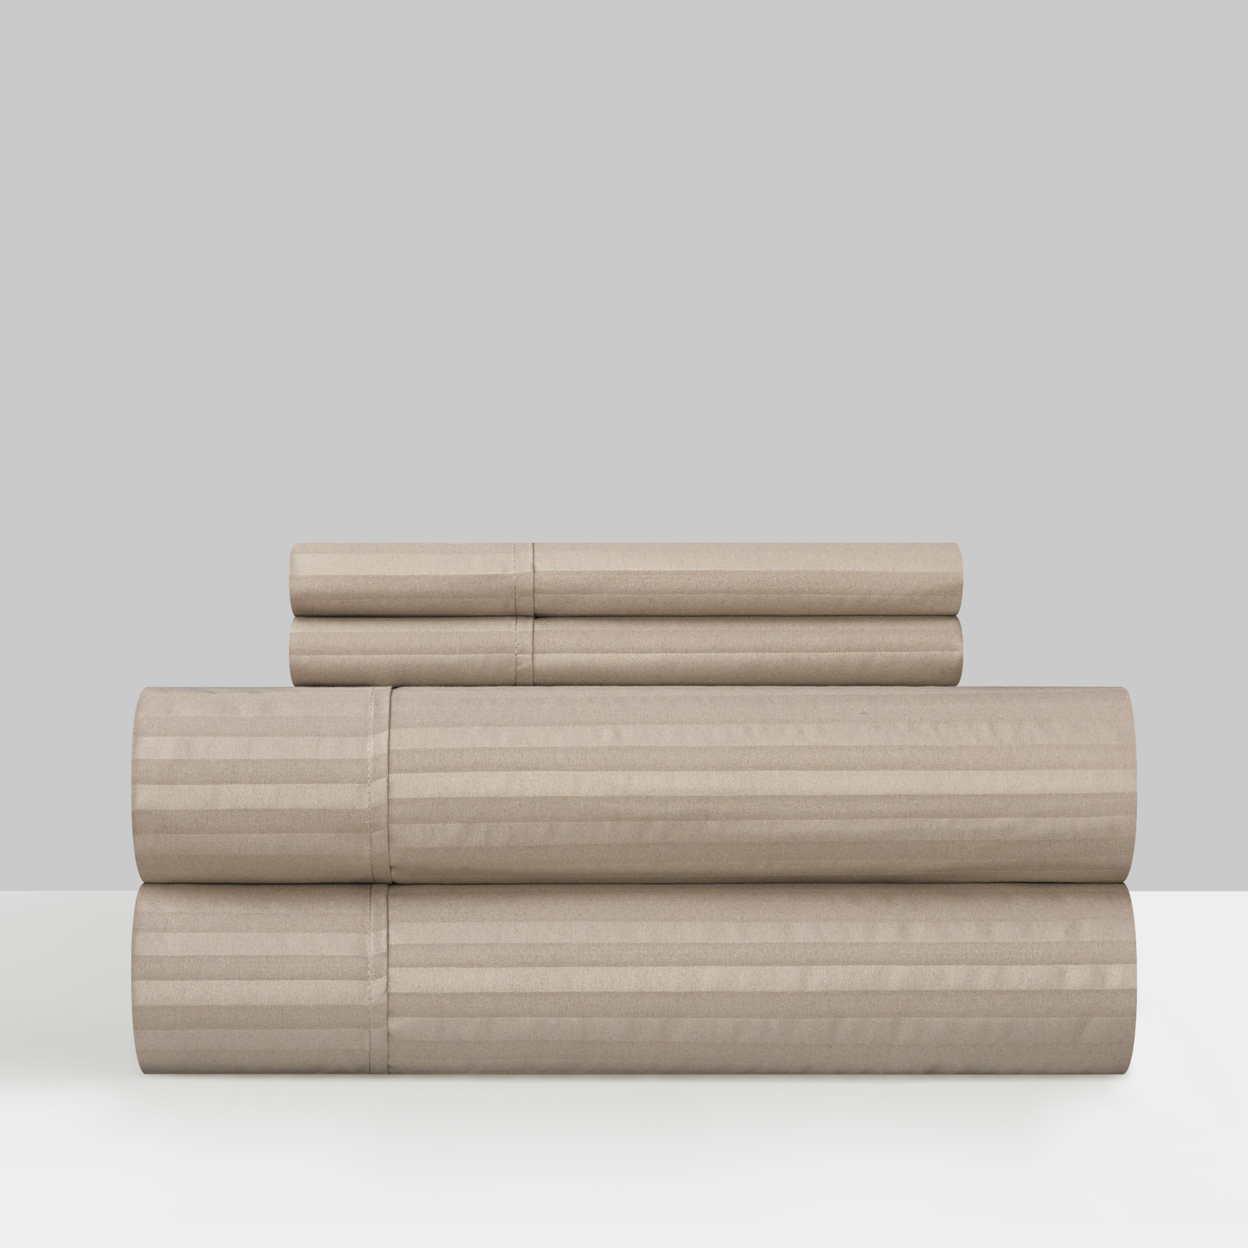 Shina 3 Or 4 Piece Sheet Set Solid Color Striped Pattern Technique - Taupe, Queen